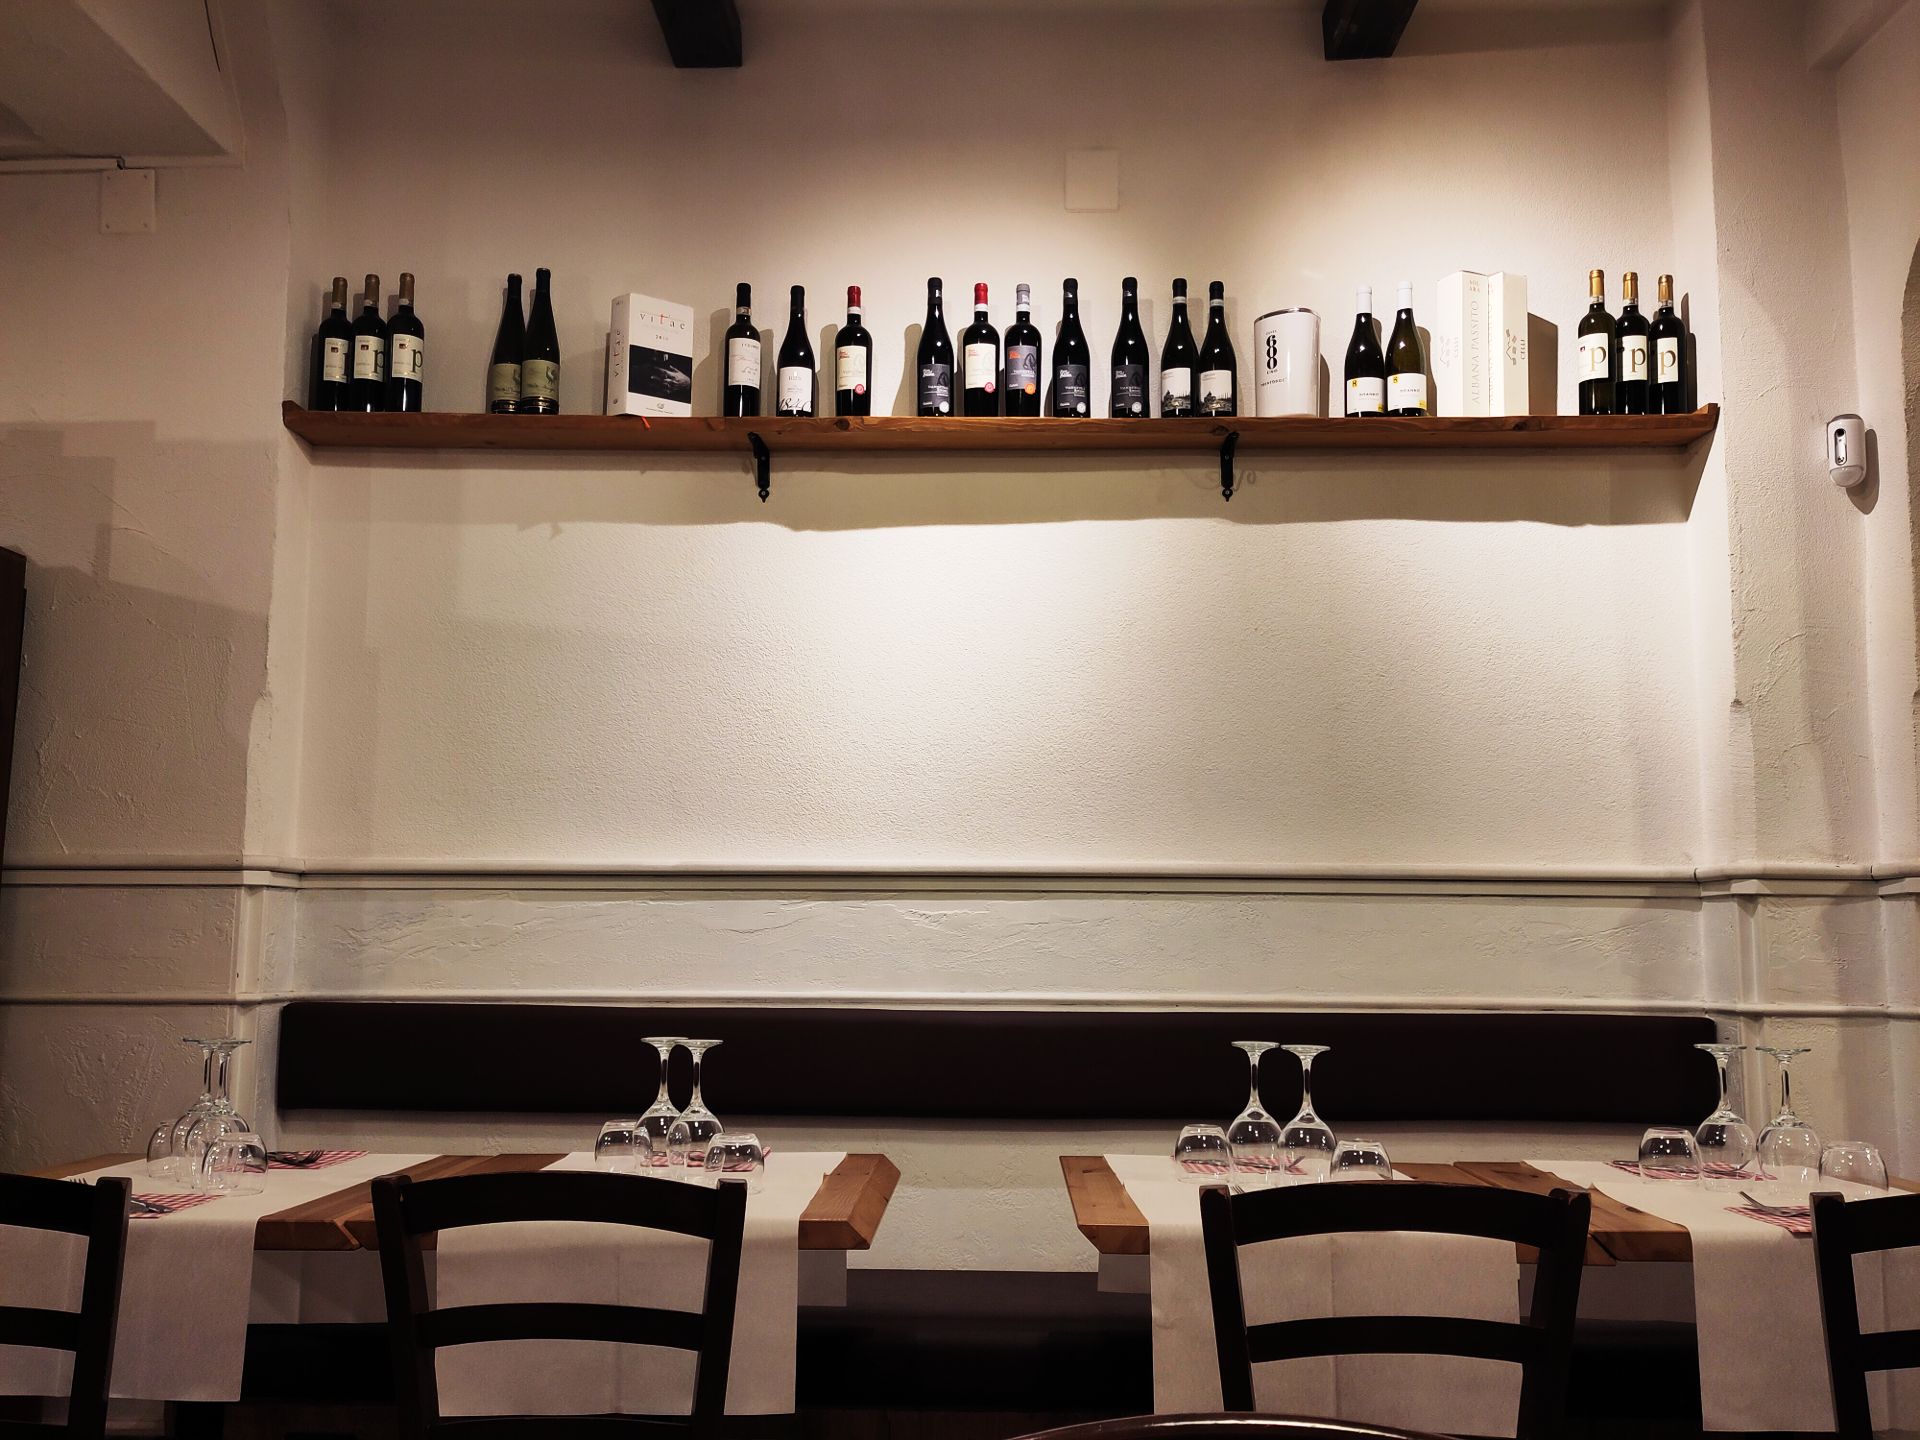 An empty restaurant with a shelf that holds many wine bottles.